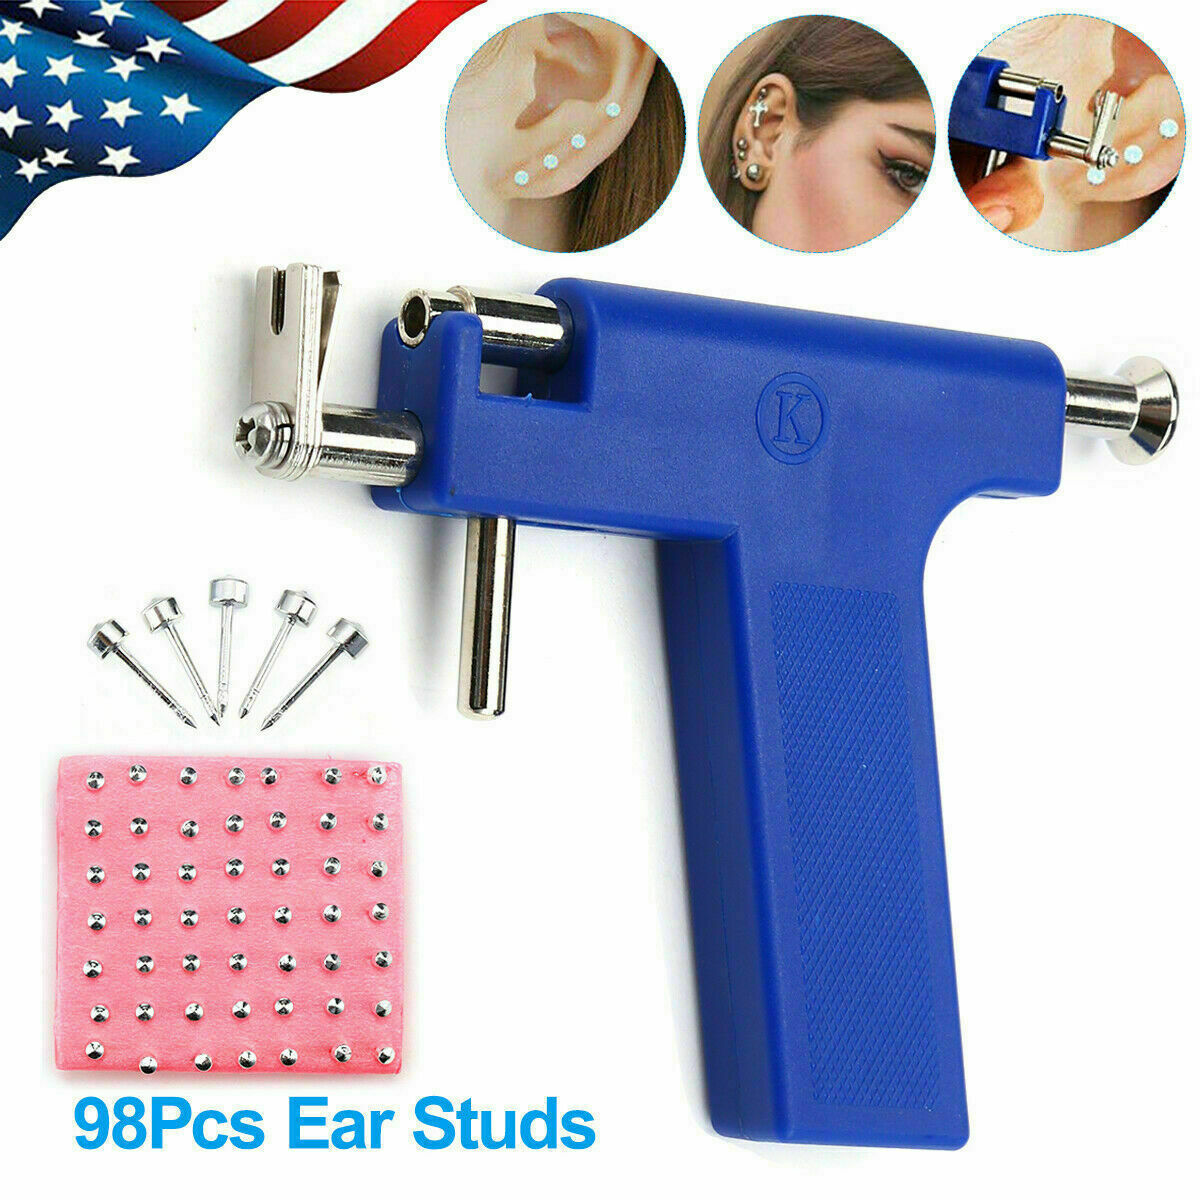 Professional Ear PIERCING GUN body Nose Navel Tool Kit Jewelry With 98-Studs